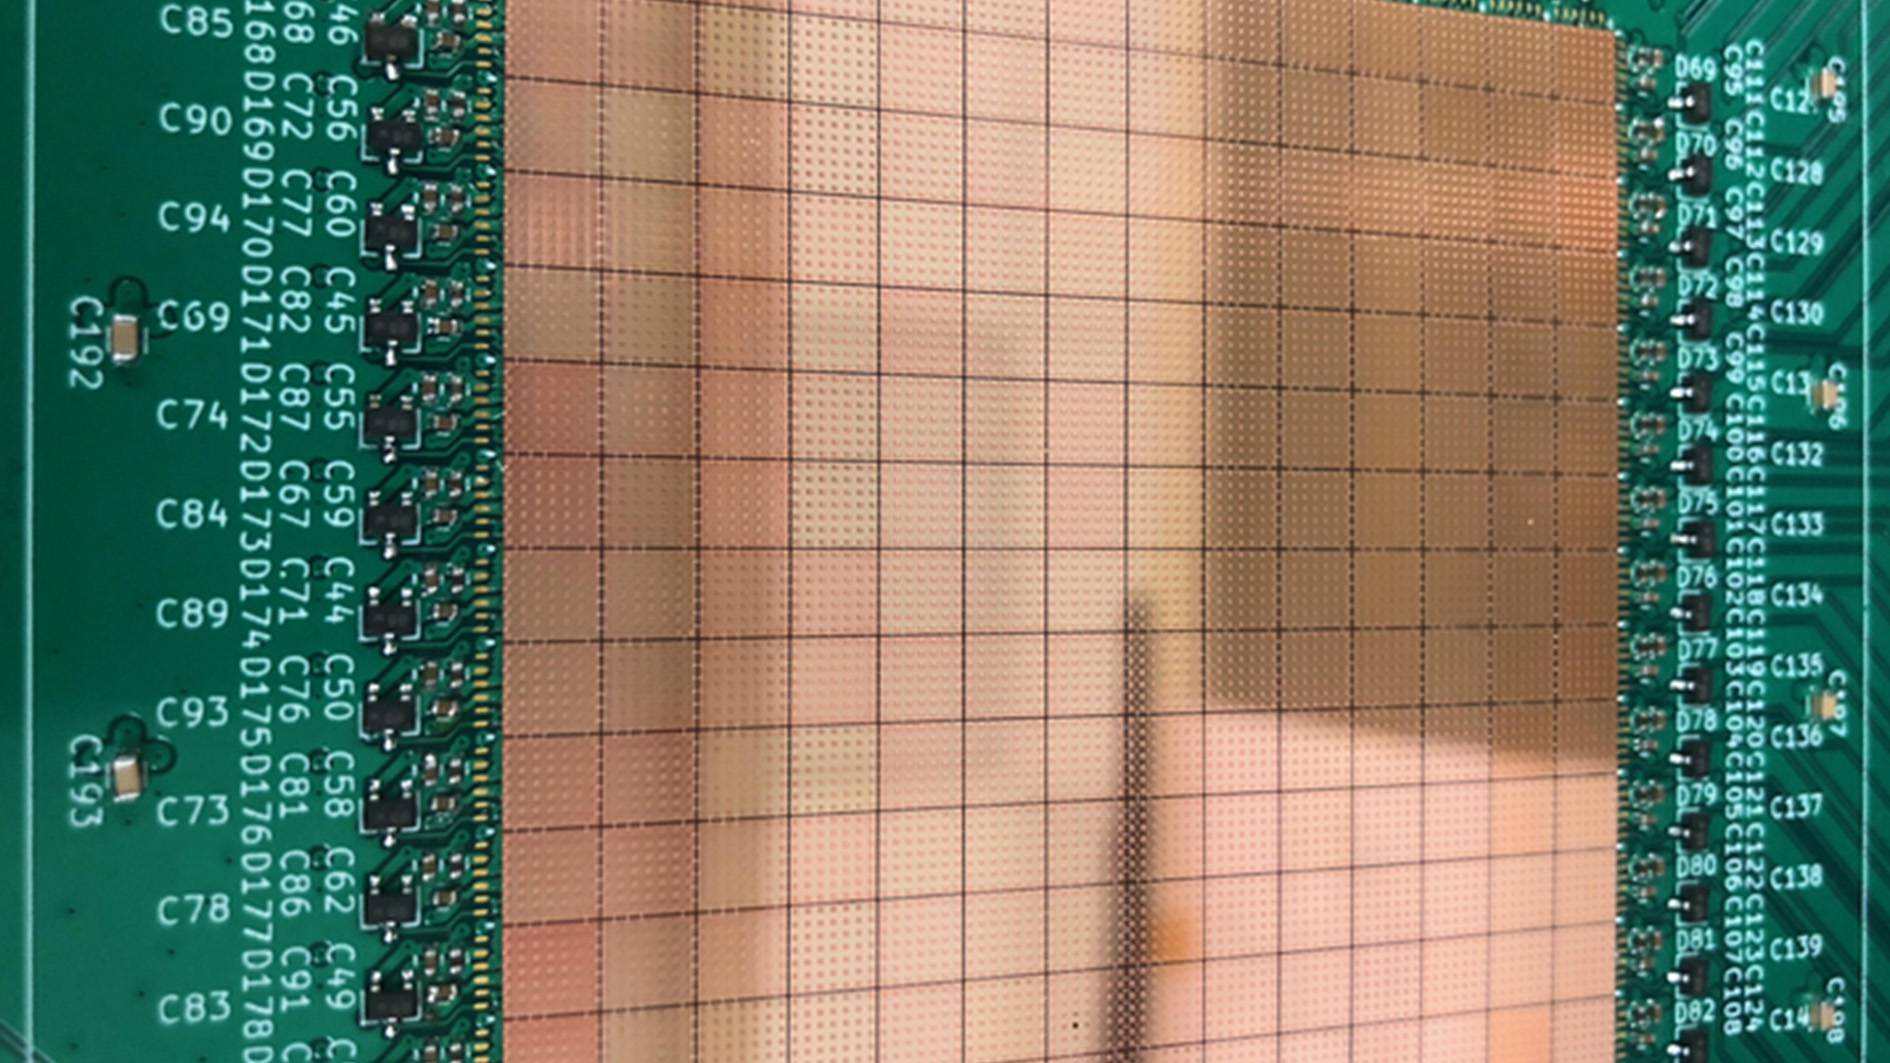  Intel works with MIT to design impressive high resolution image scaling chips 